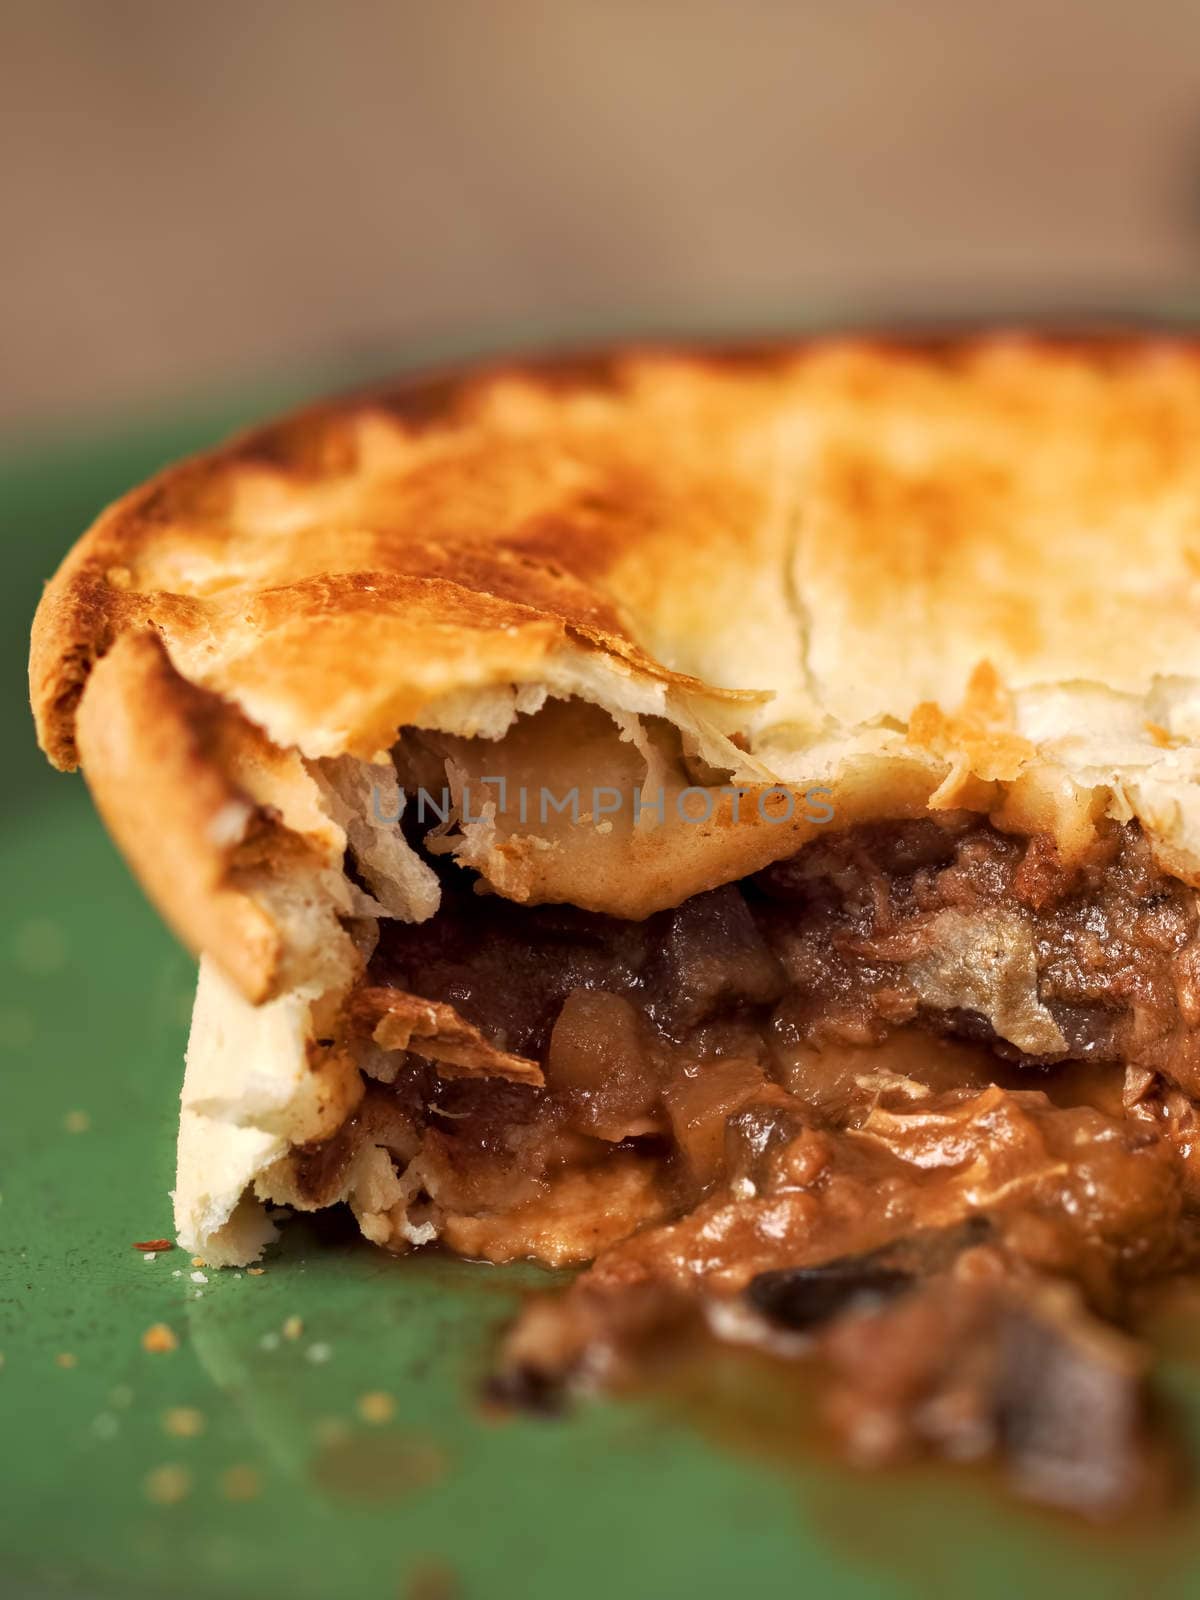 rustic meat and mushroom pie by zkruger